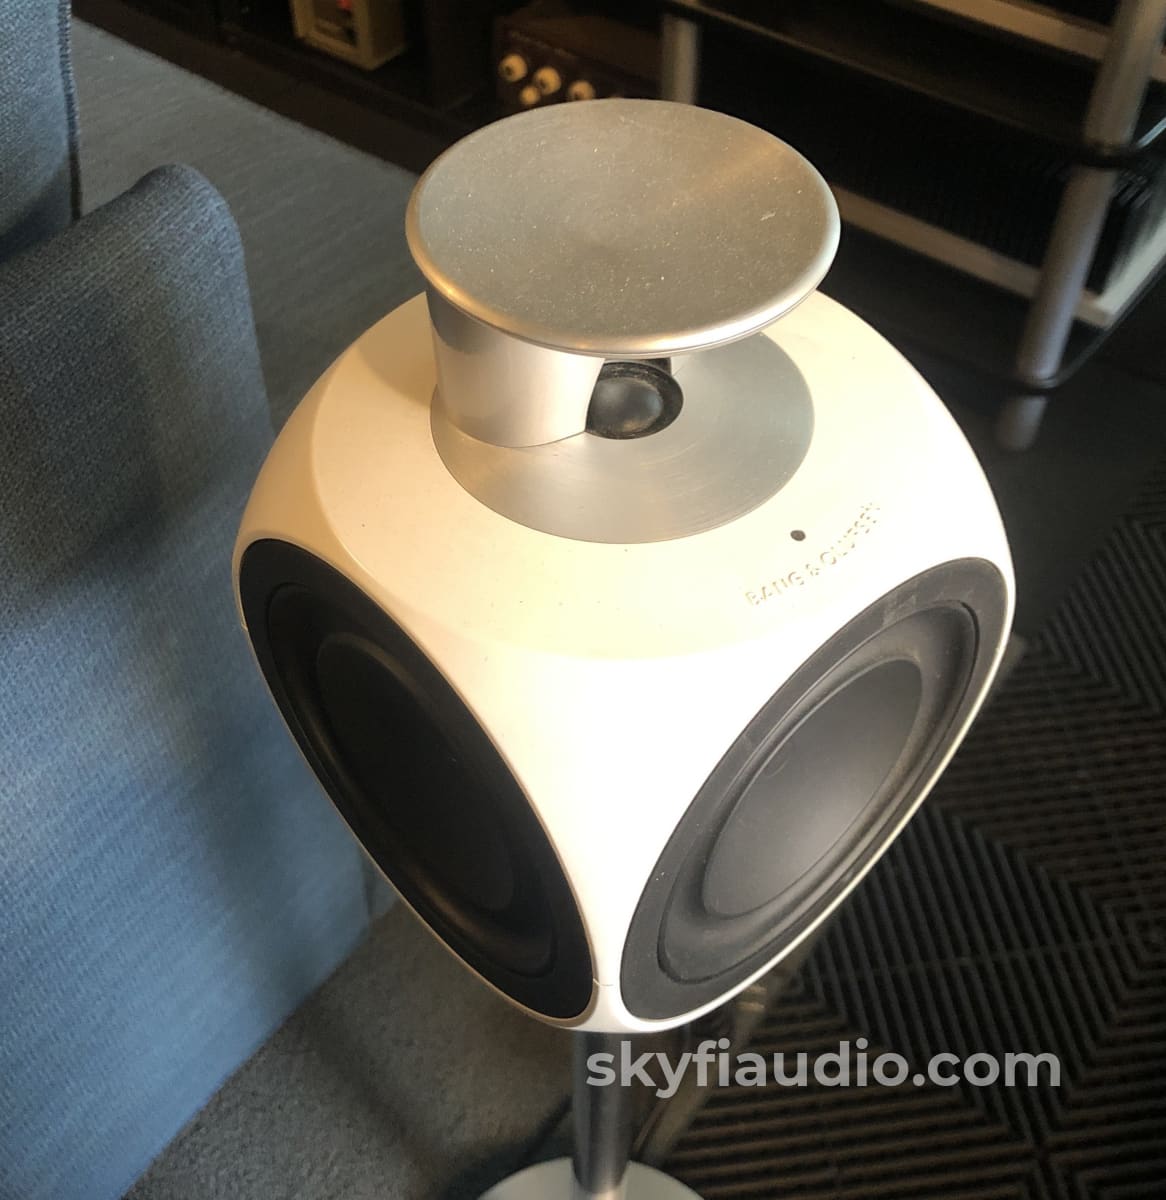 B&O (Bang & Olufsen) Beolab 3 Powered Speakers - With Stands